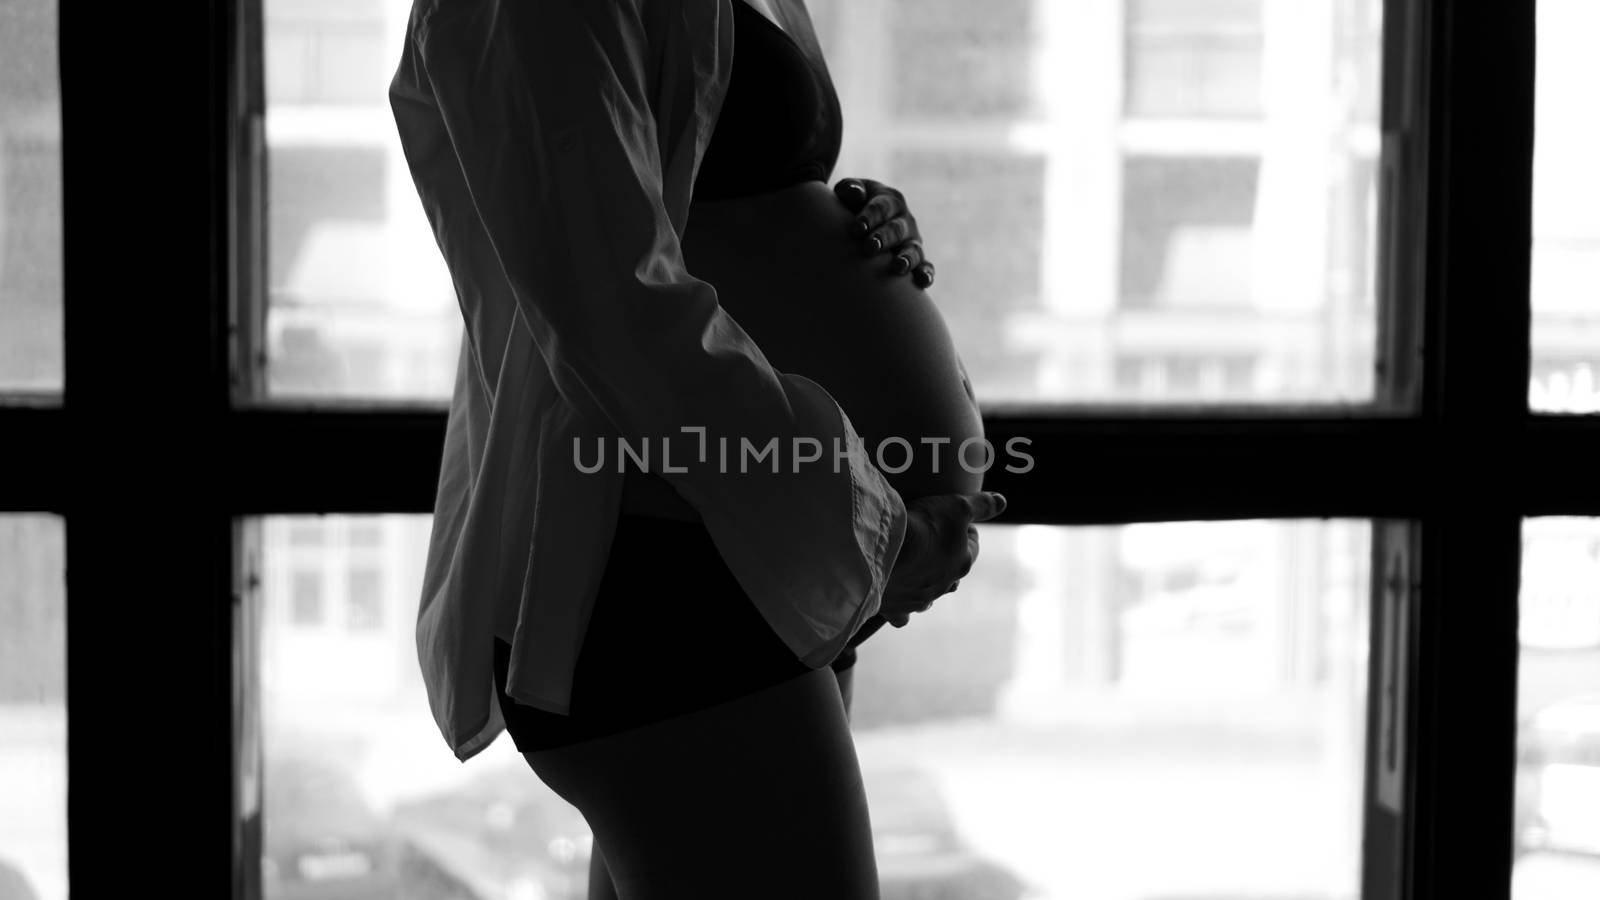 Pregnant woman standing by window - black and white silhouette